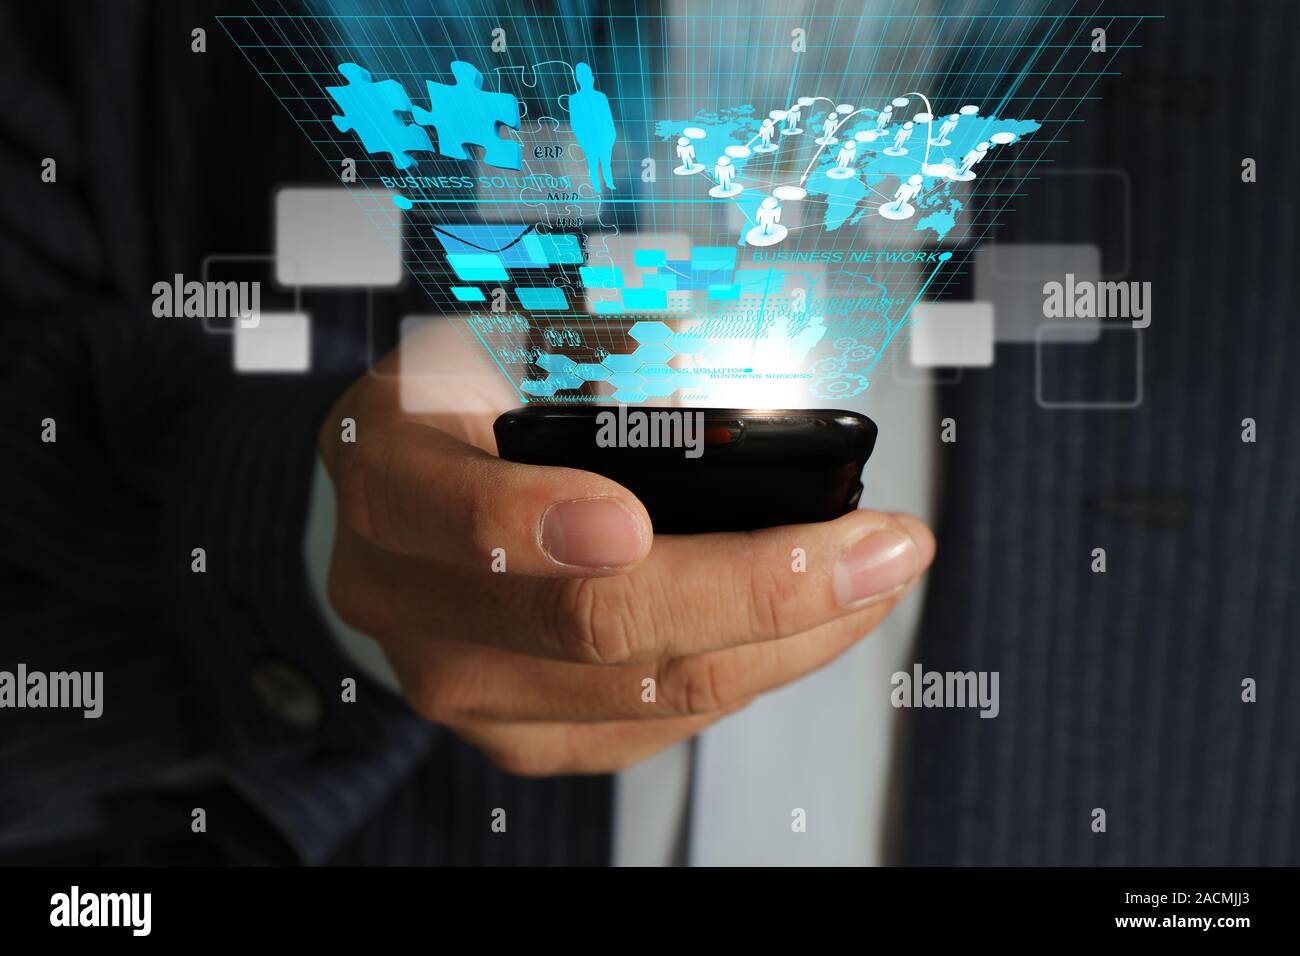 Business man hand use mobile phone streaming virtual Business network process diagram Stock Photo